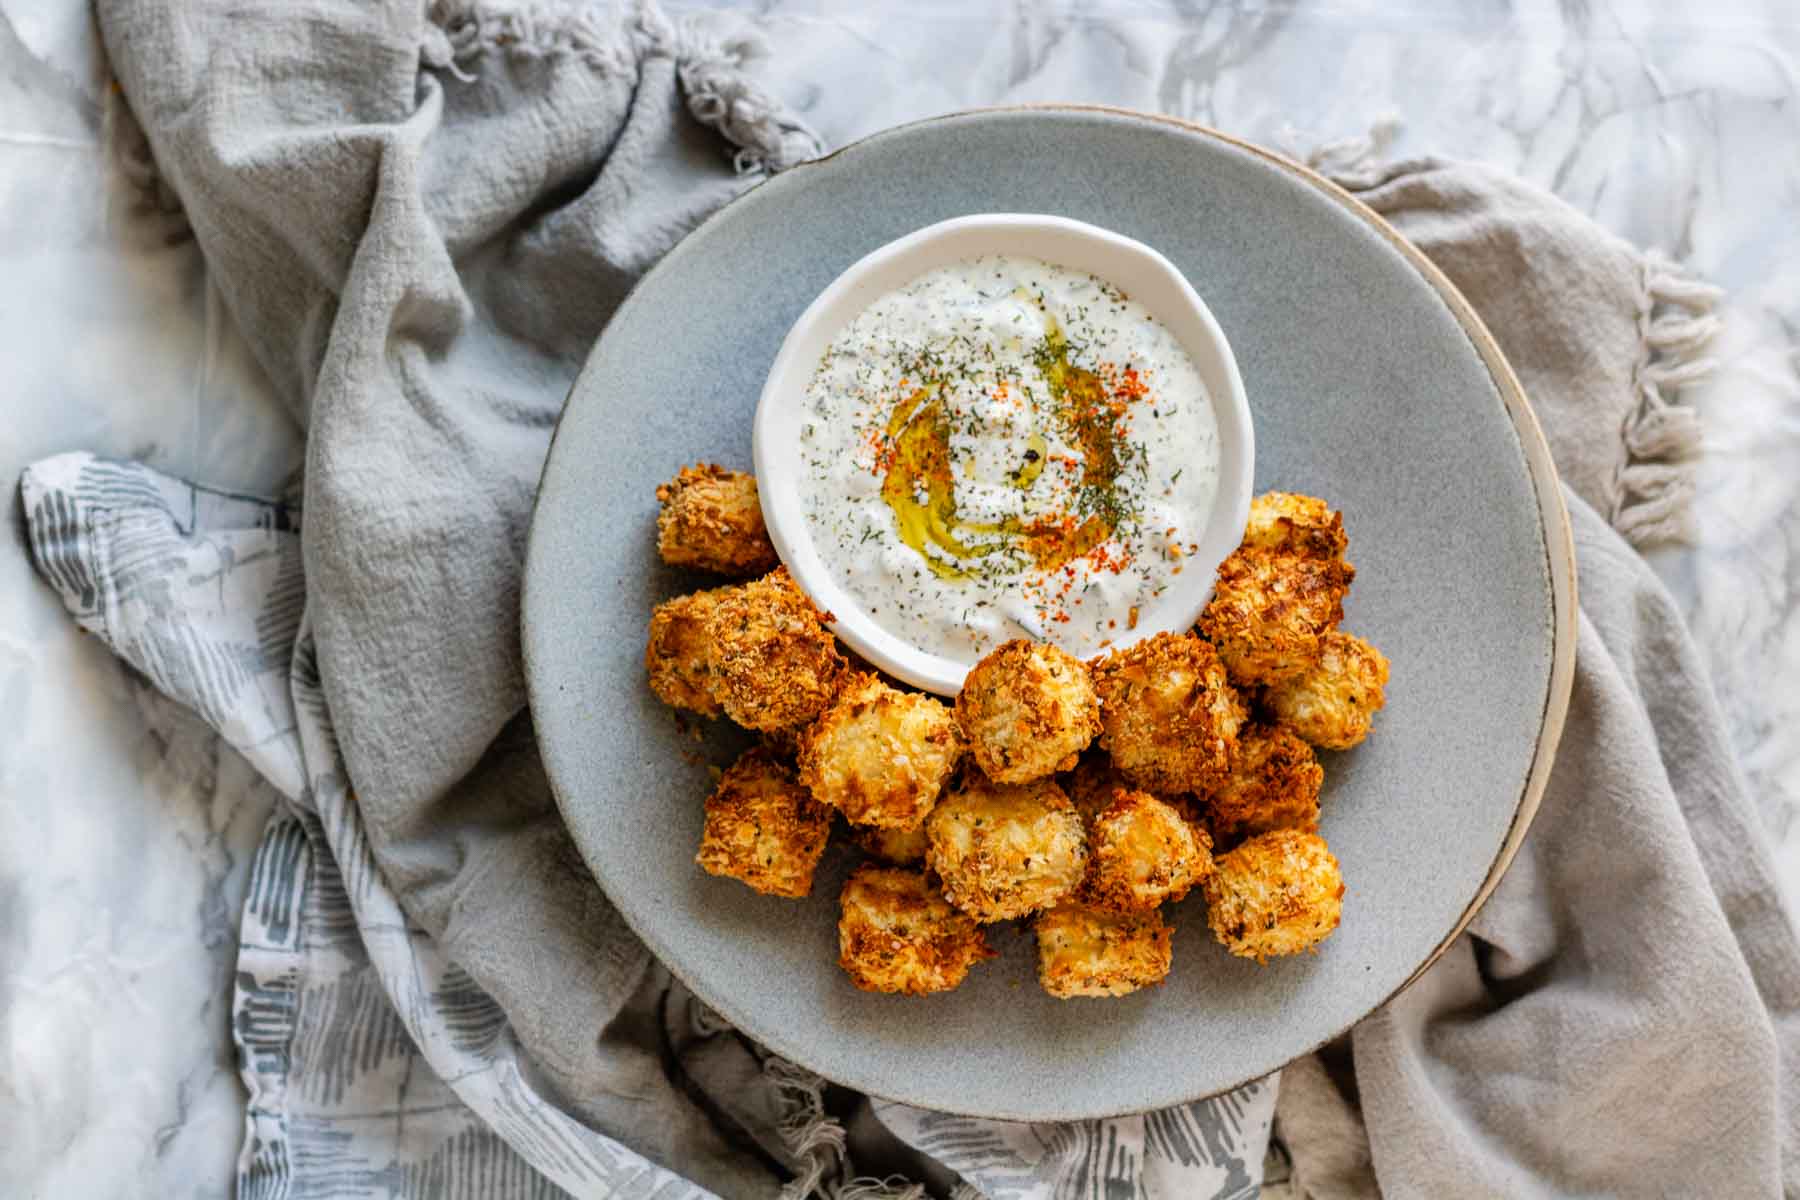 Breaded halloumi cubes on a plate with a bowl of dip.